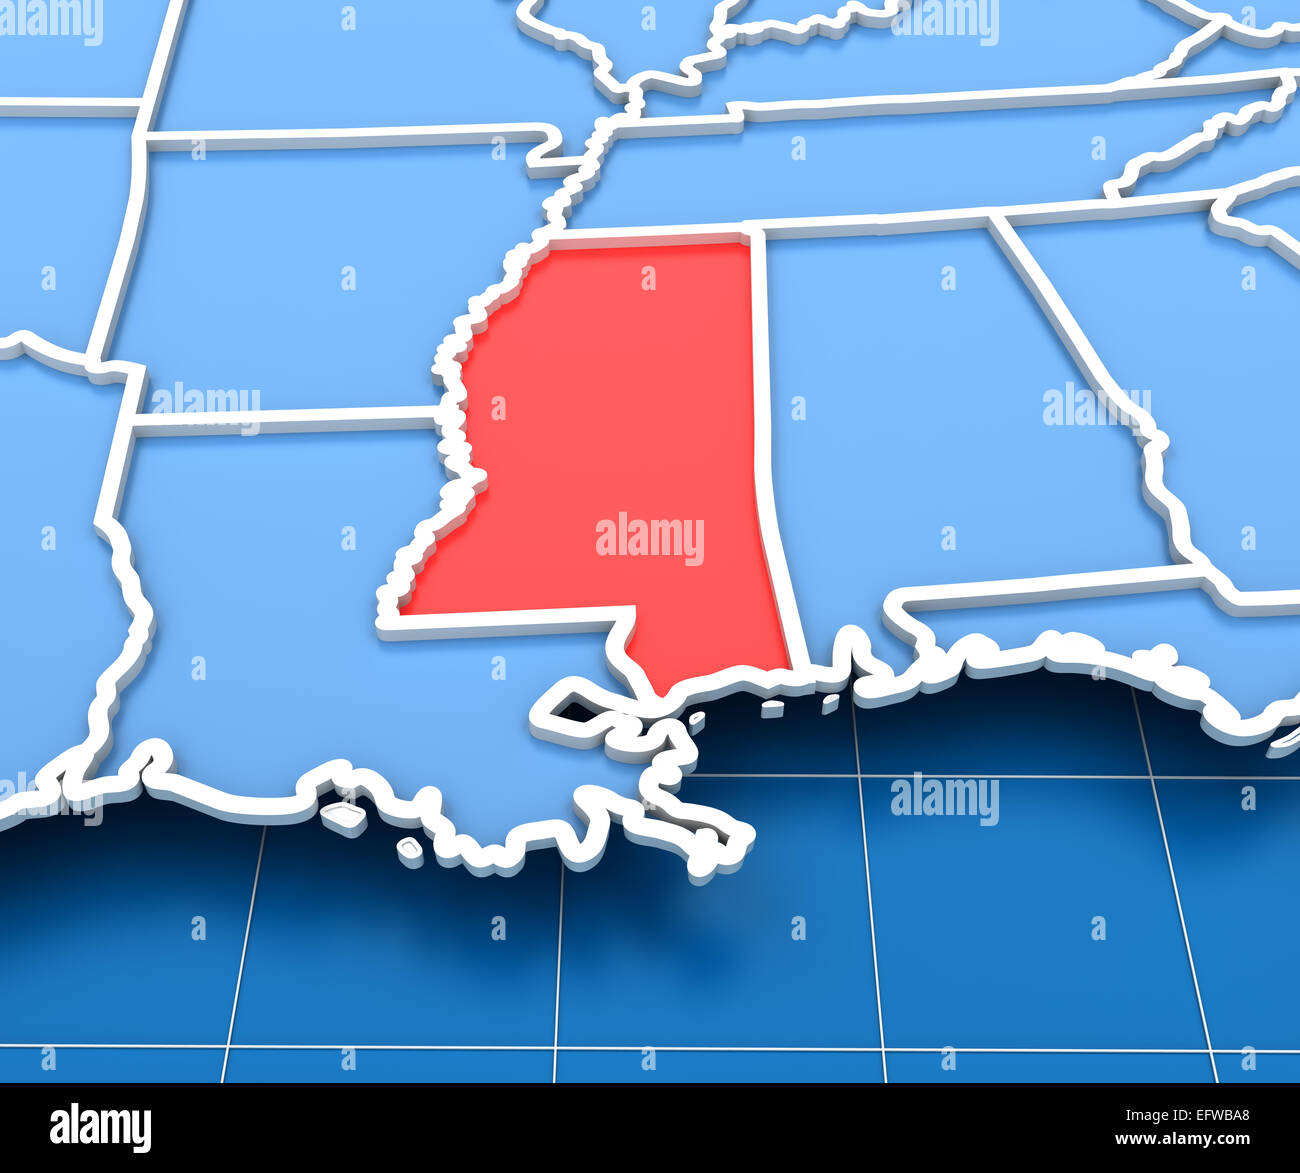 3d render of USA map with Mississippi state highlighted Stock Photo